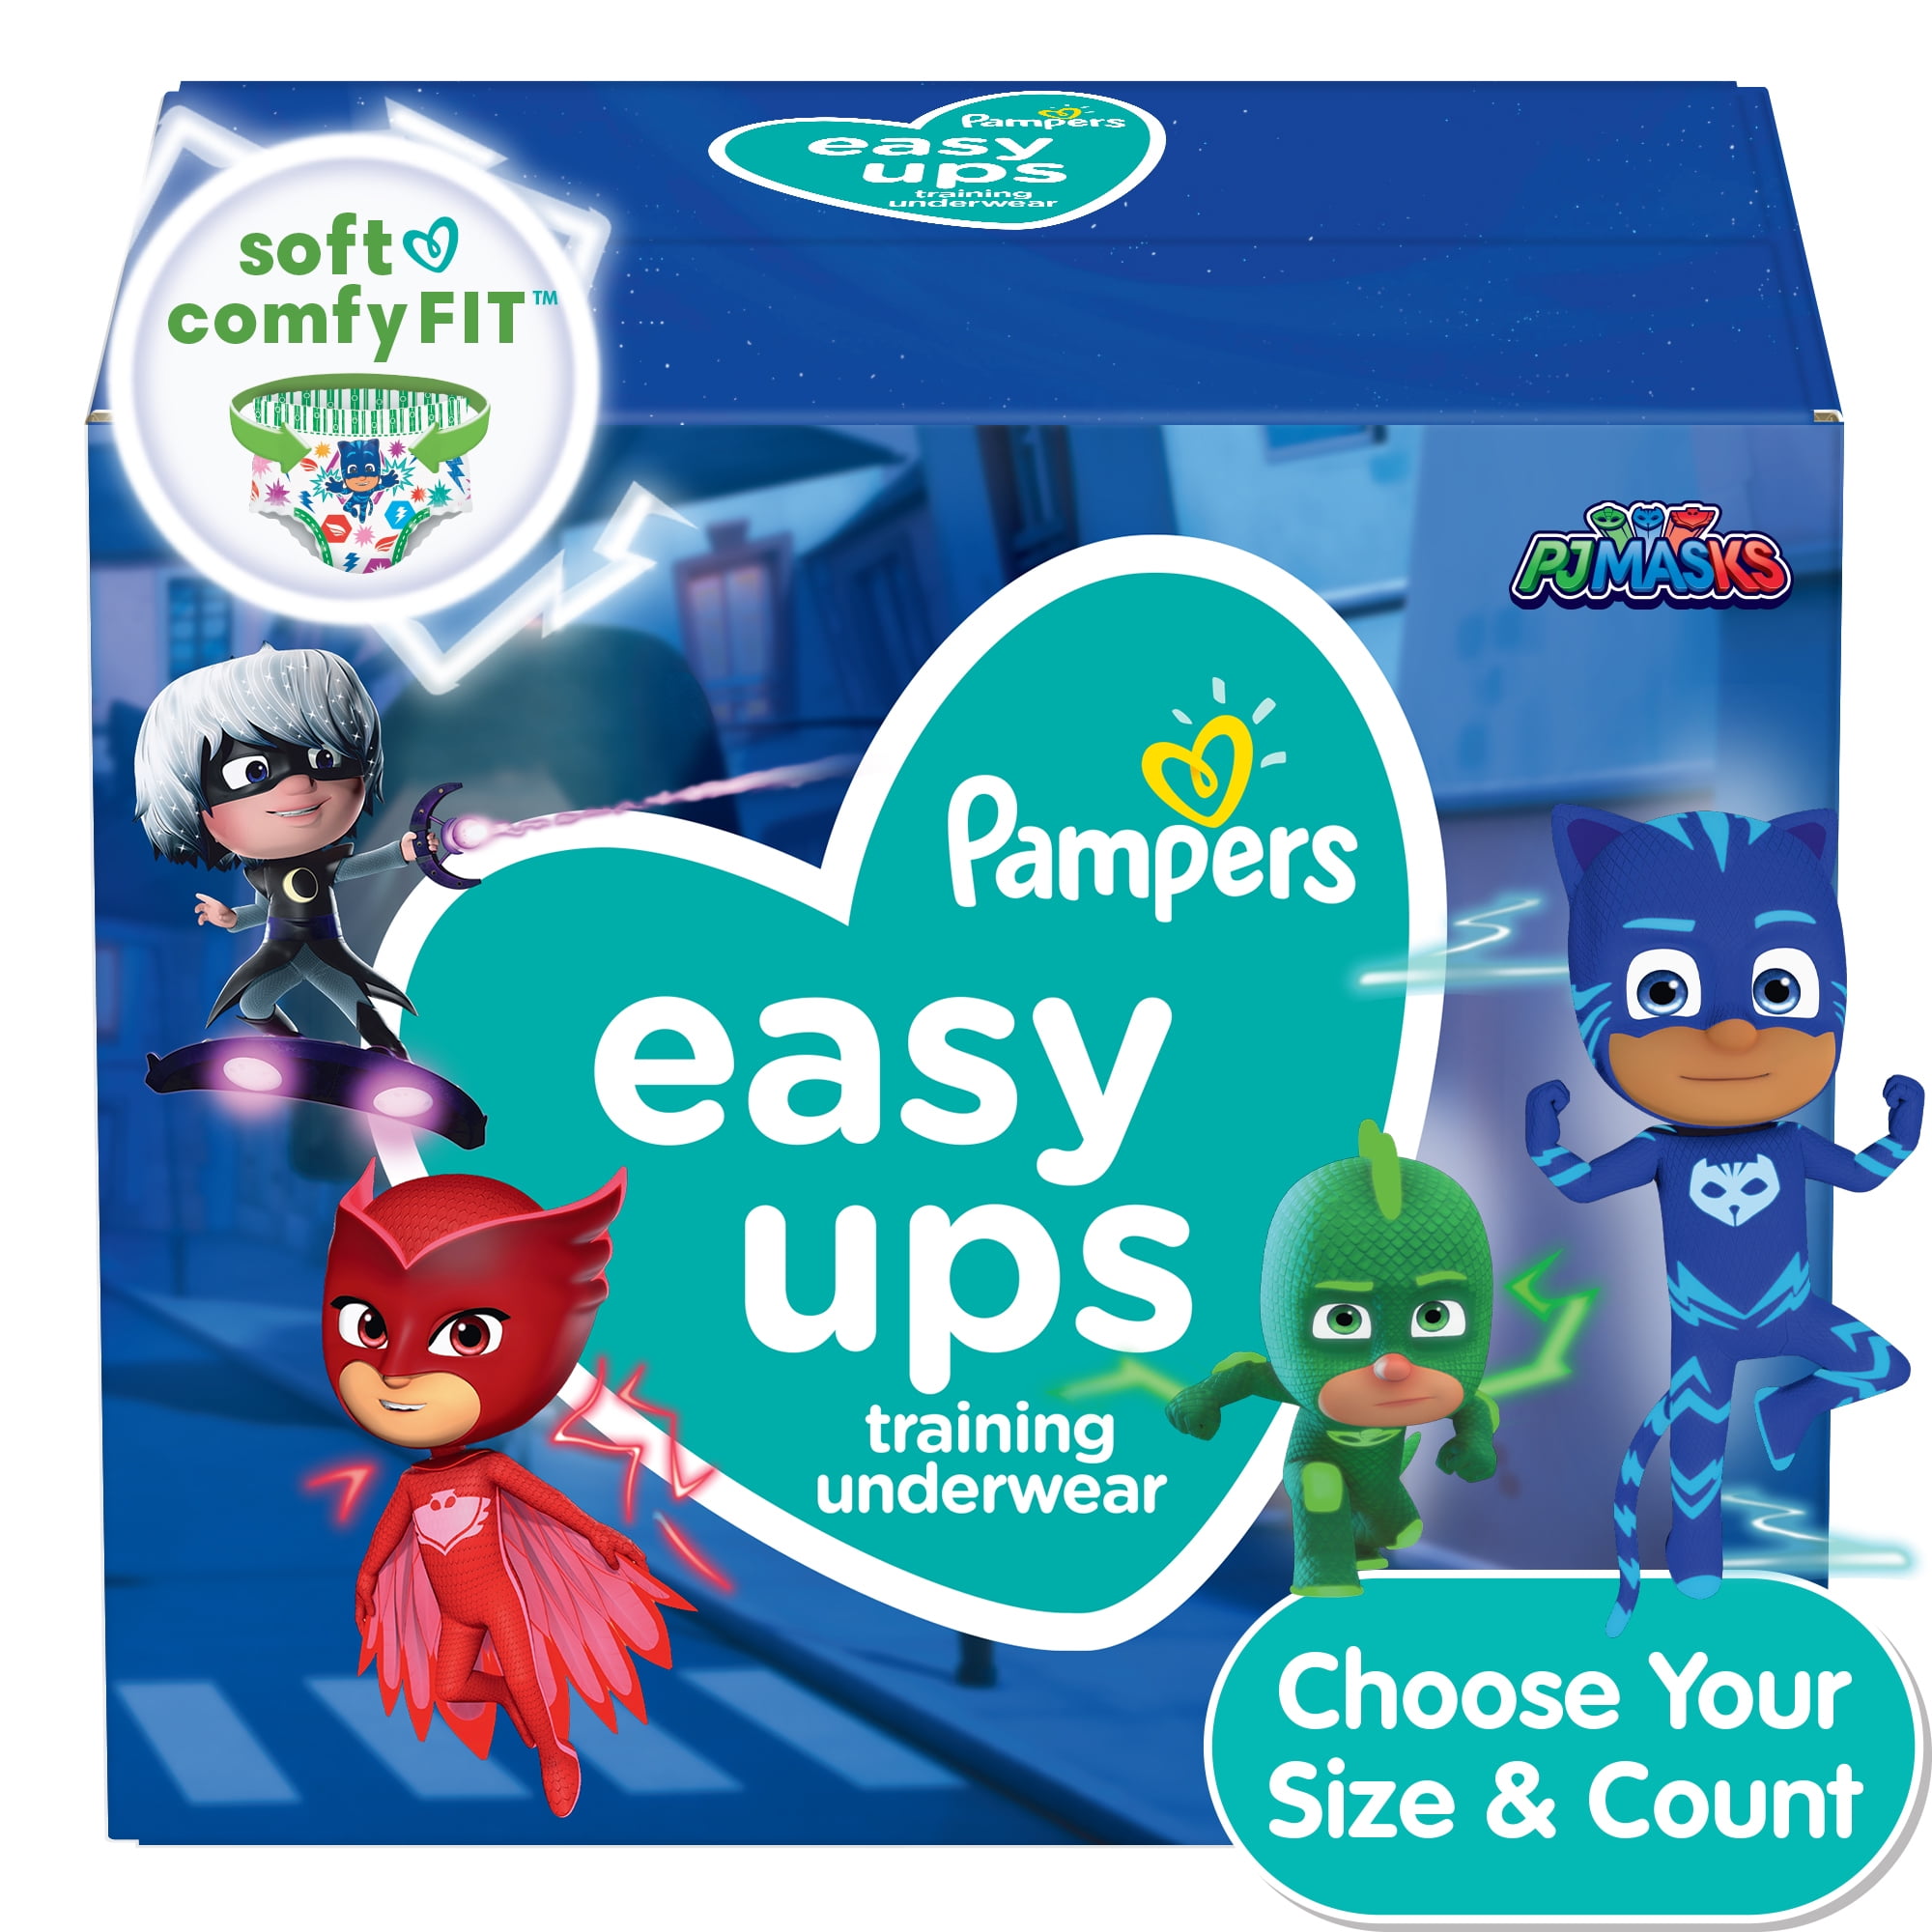 Pampers Easy Ups PJ Mask Training Pants Boys Size 4T/5T 66 Count (Select for More Options)